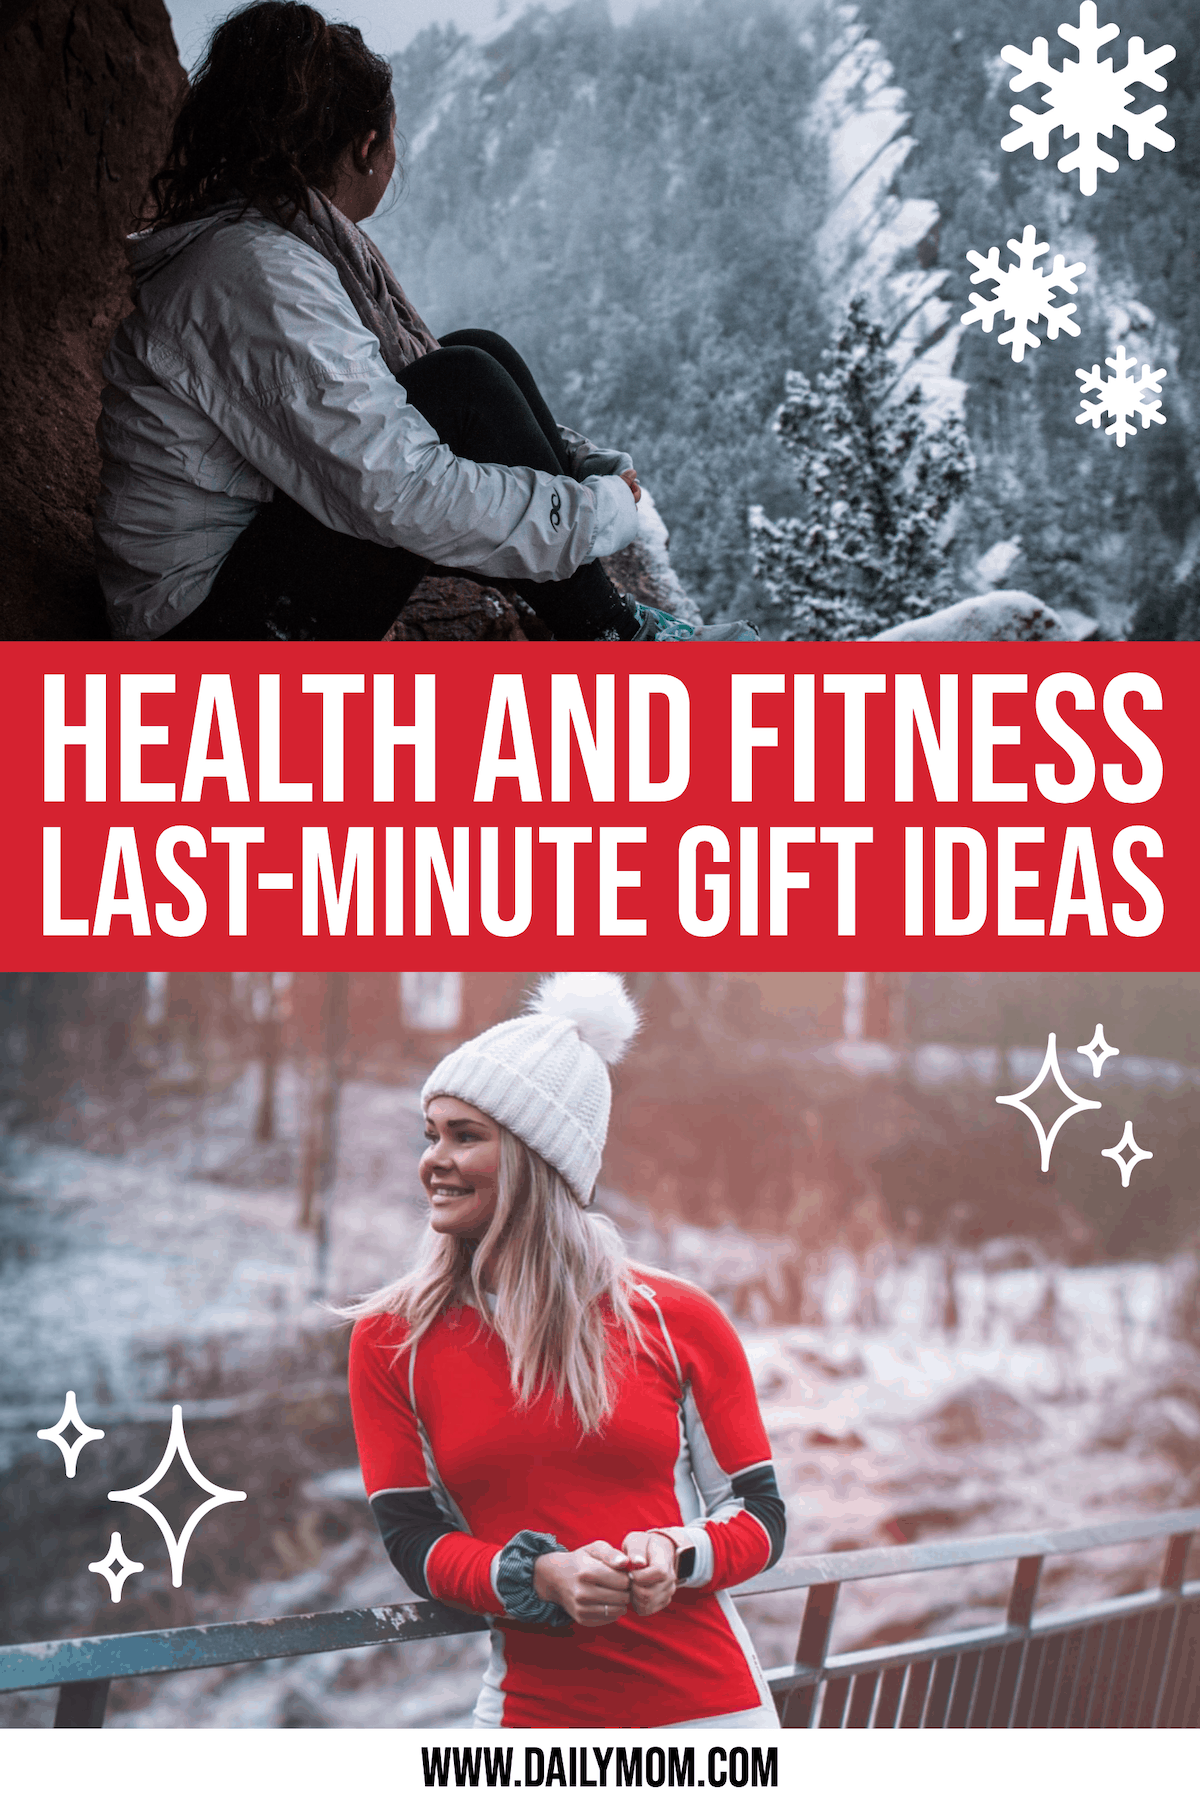 26 Last-Minute Health And Fitness Gifts For The Health Conscious